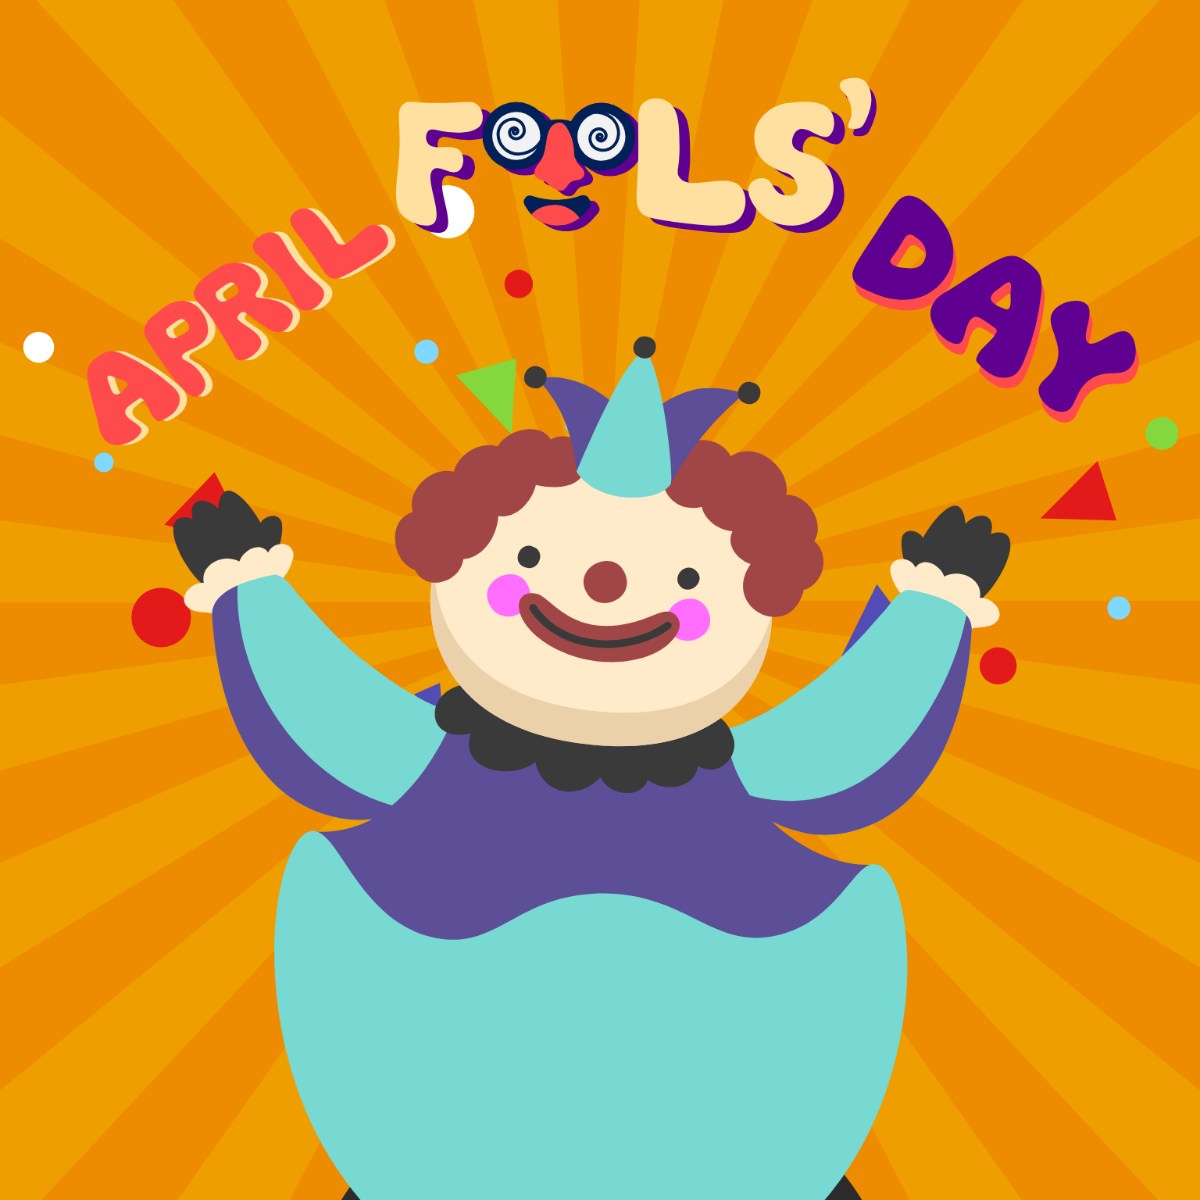 Colorful April Fools’ Day Vector